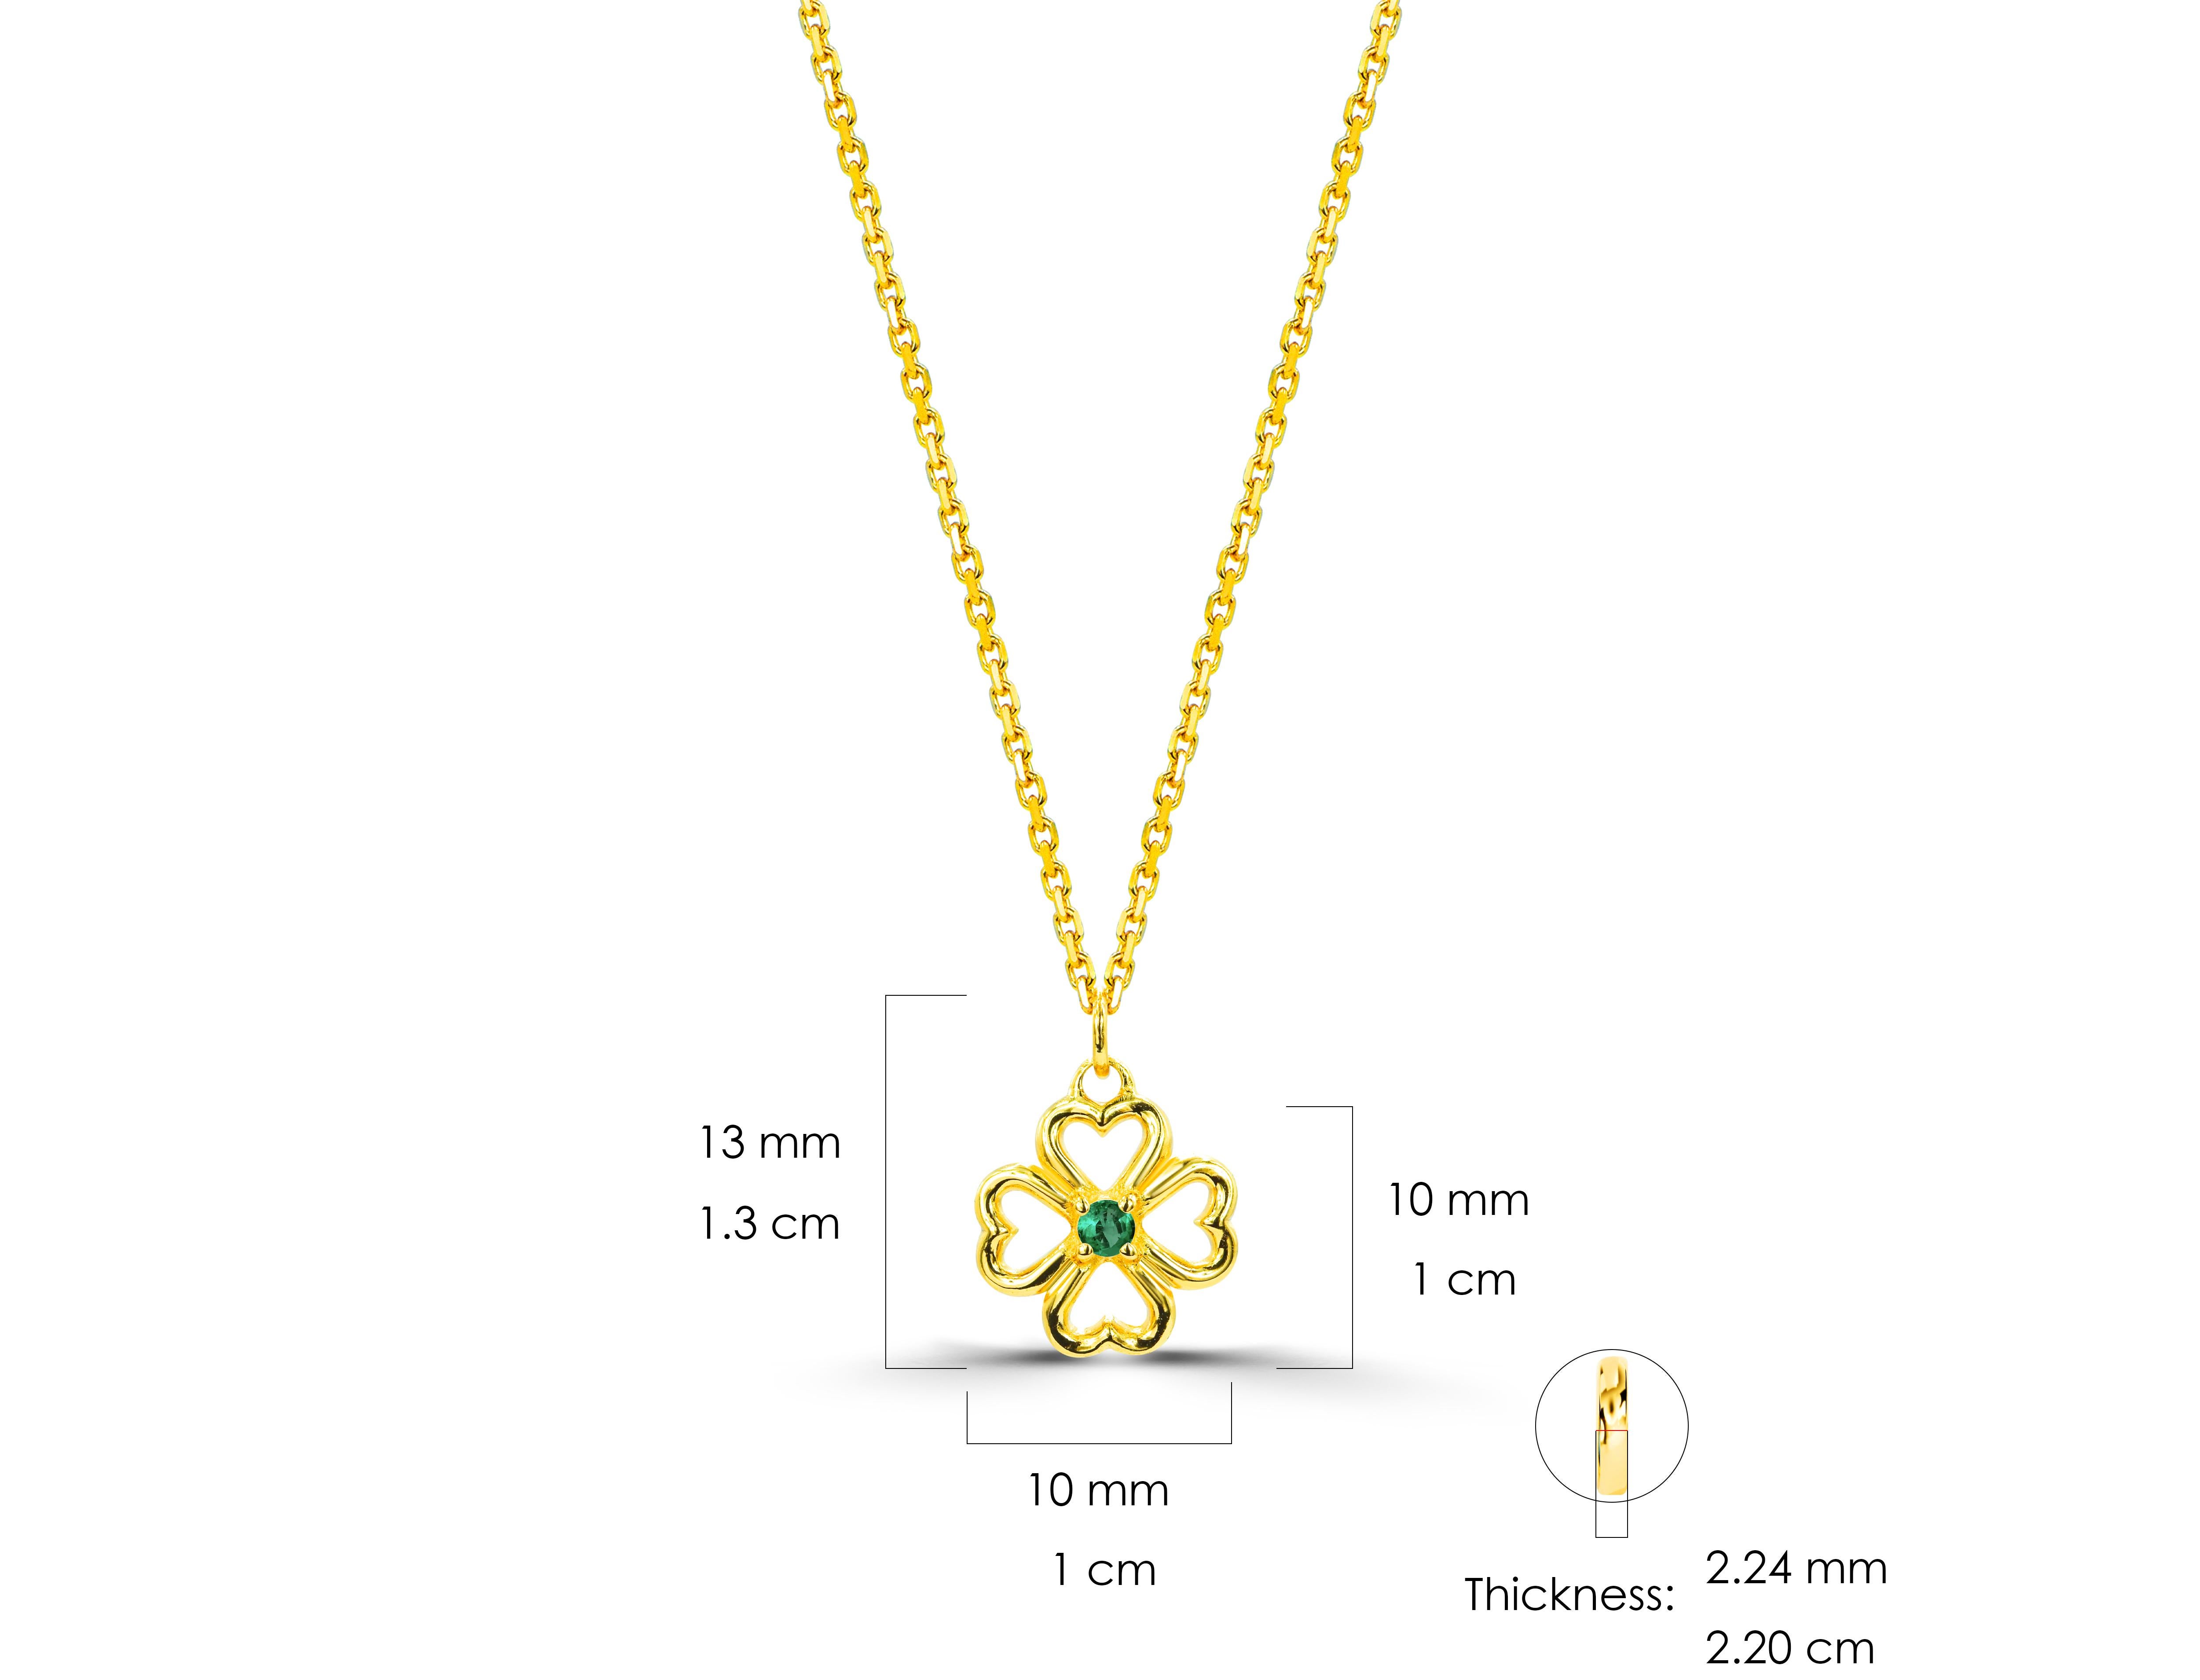 0.04 Ct Emerald, Ruby and Sapphire Clover Necklace in 18K Gold For Sale 1